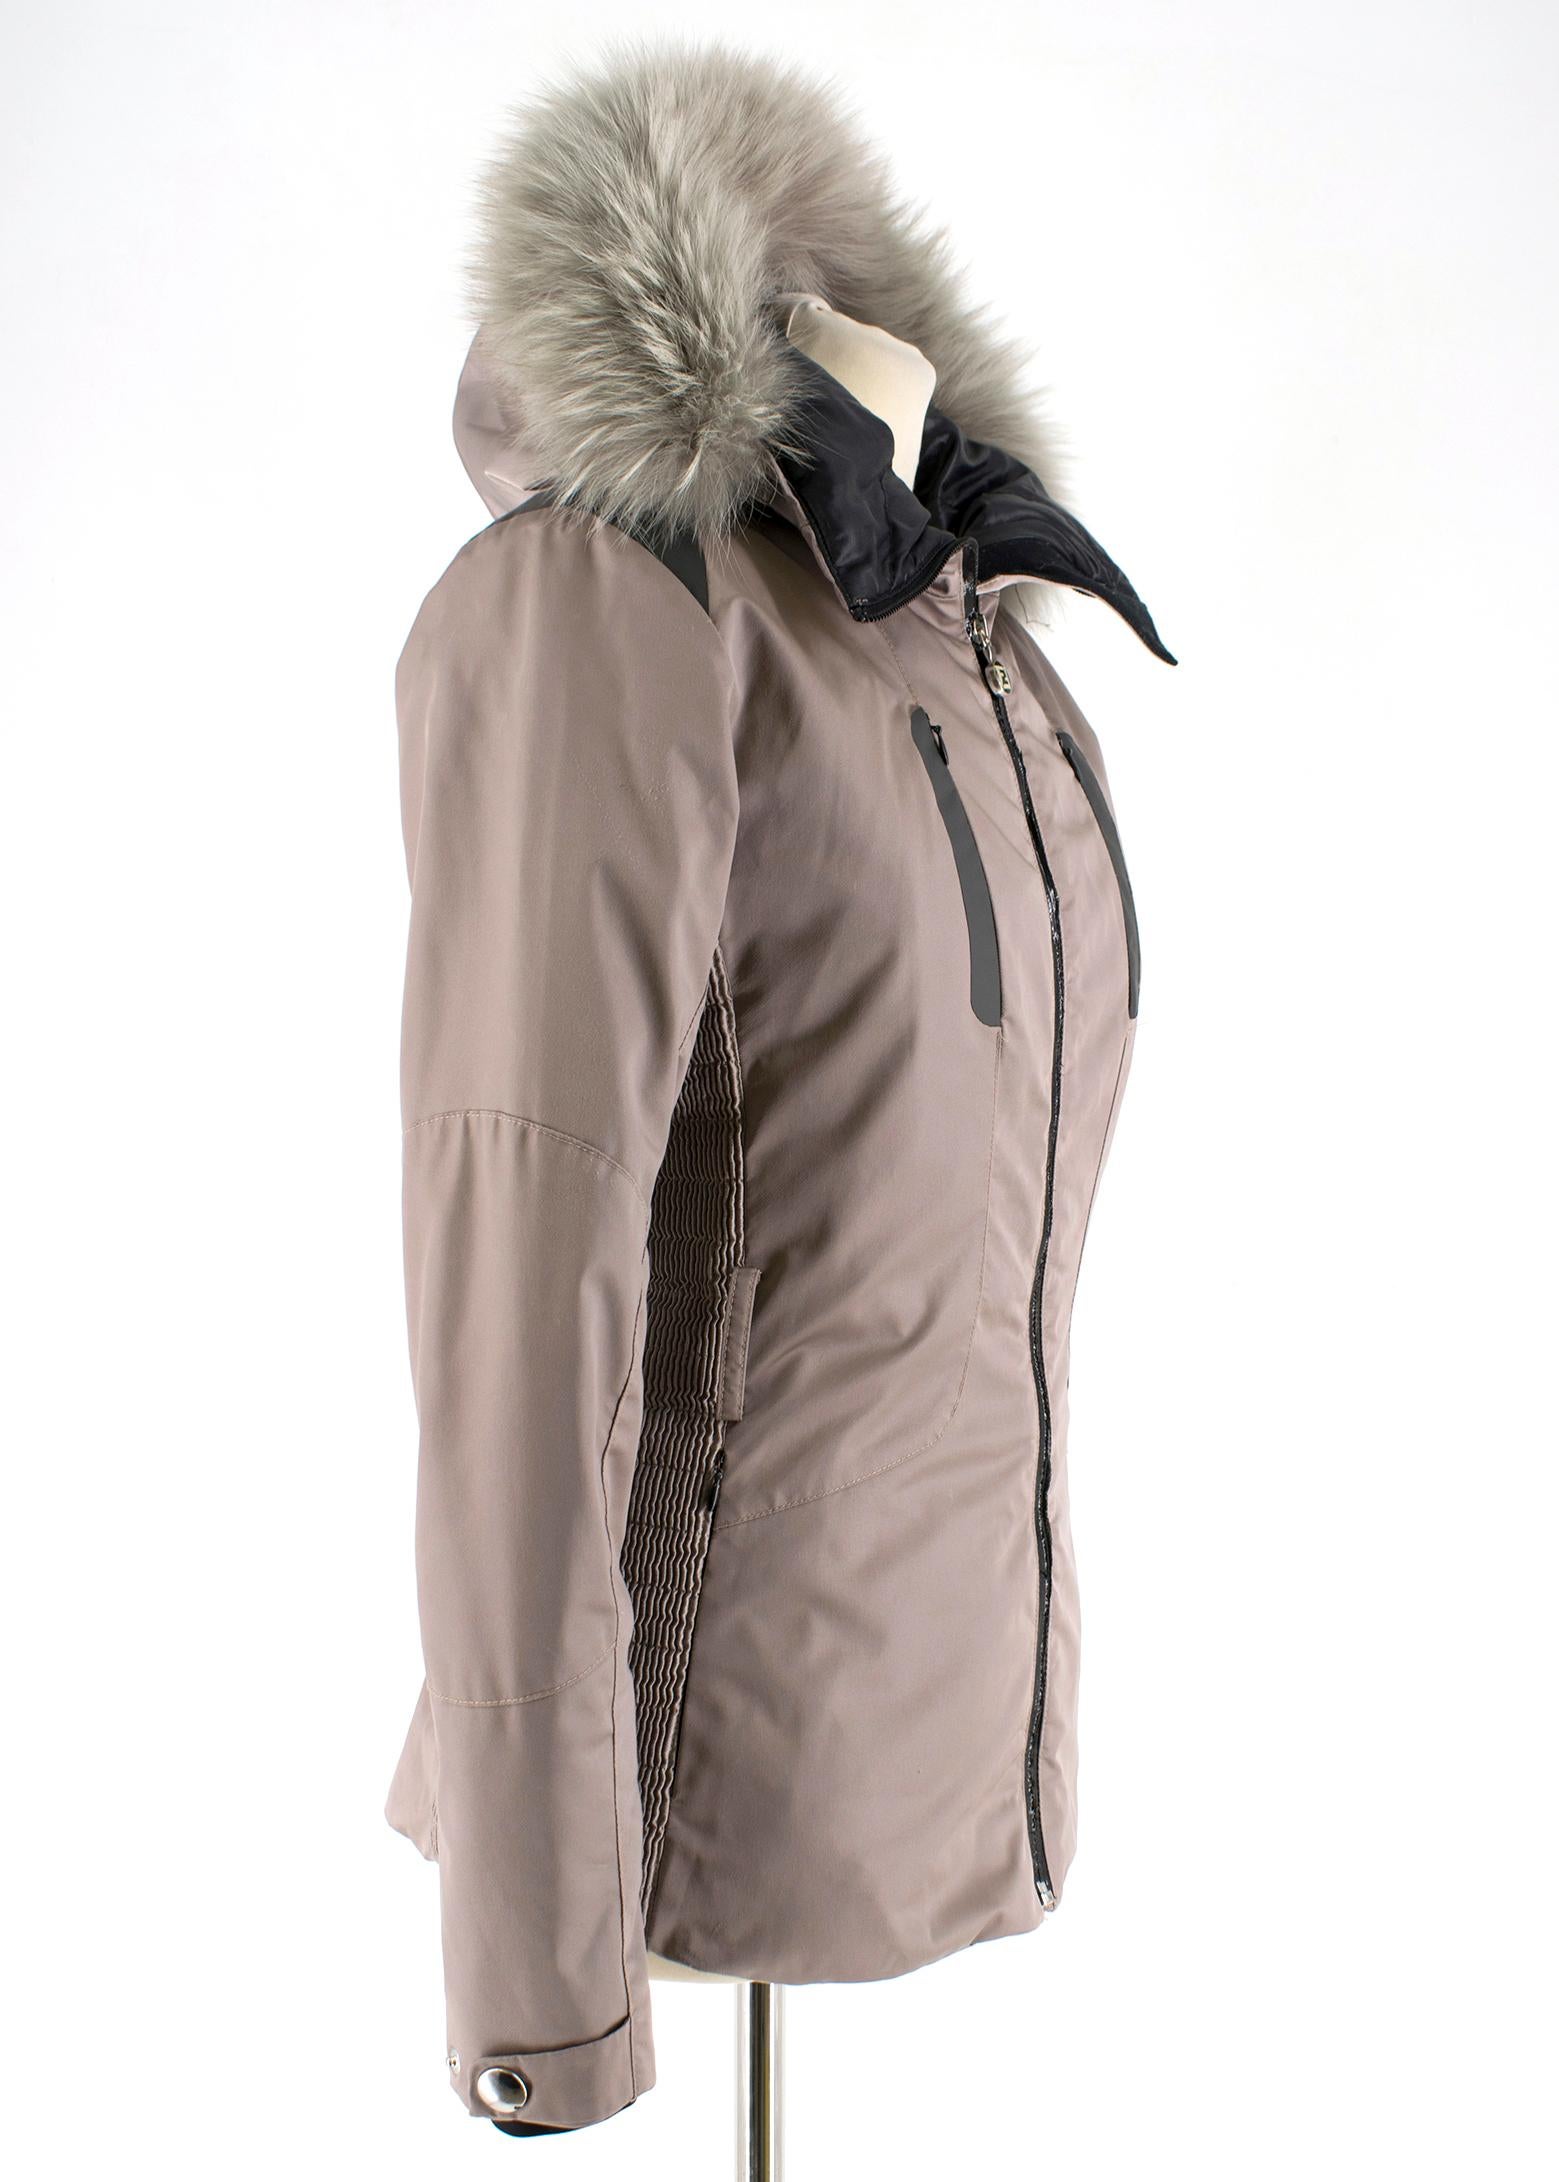 Fendi Ski Jacket with Detachable Hood

- Fox Fur Hood 
- Breathable 
- Front Zip 
- Thermal Lining 
- Internal and External Pockets 
- FF Central Internal Logo 
- Belt Loops 

Made in Poland 

Please note, these items are pre-owned and may show